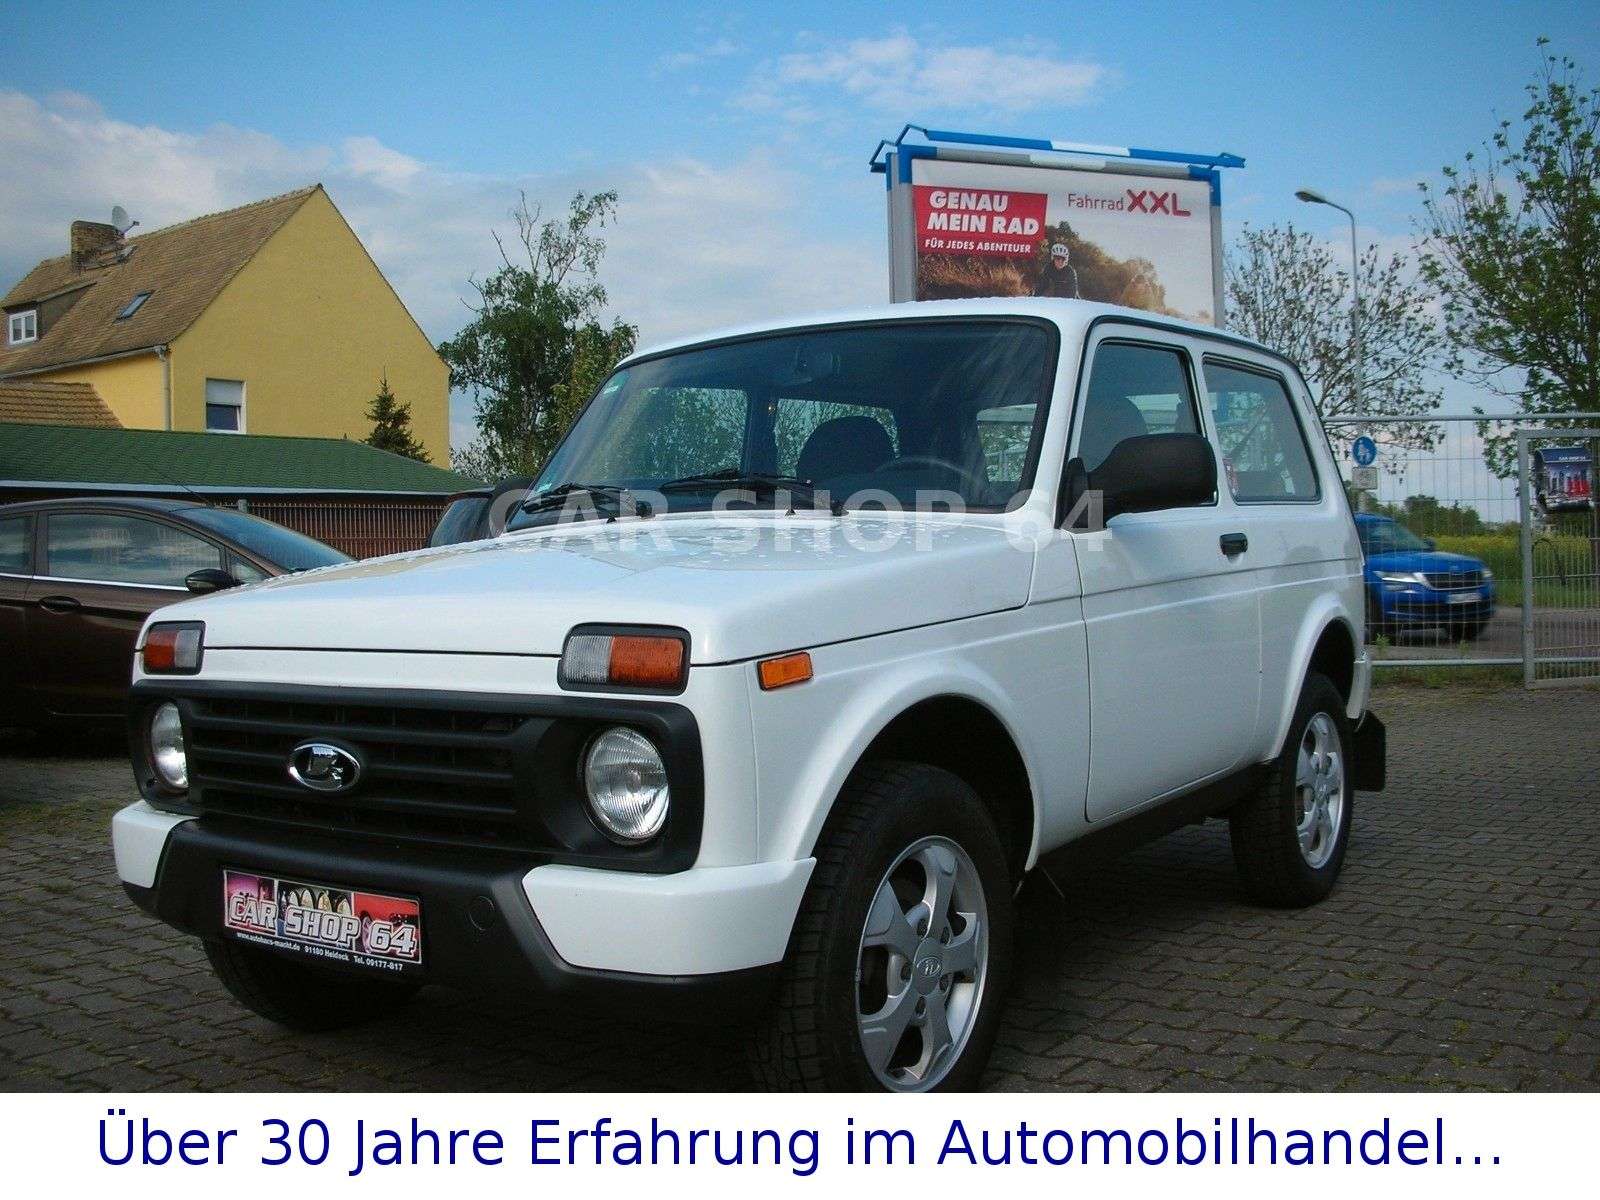 Lada Niva Off-Road/Pick-up in White used in Halle for € 11,499.-